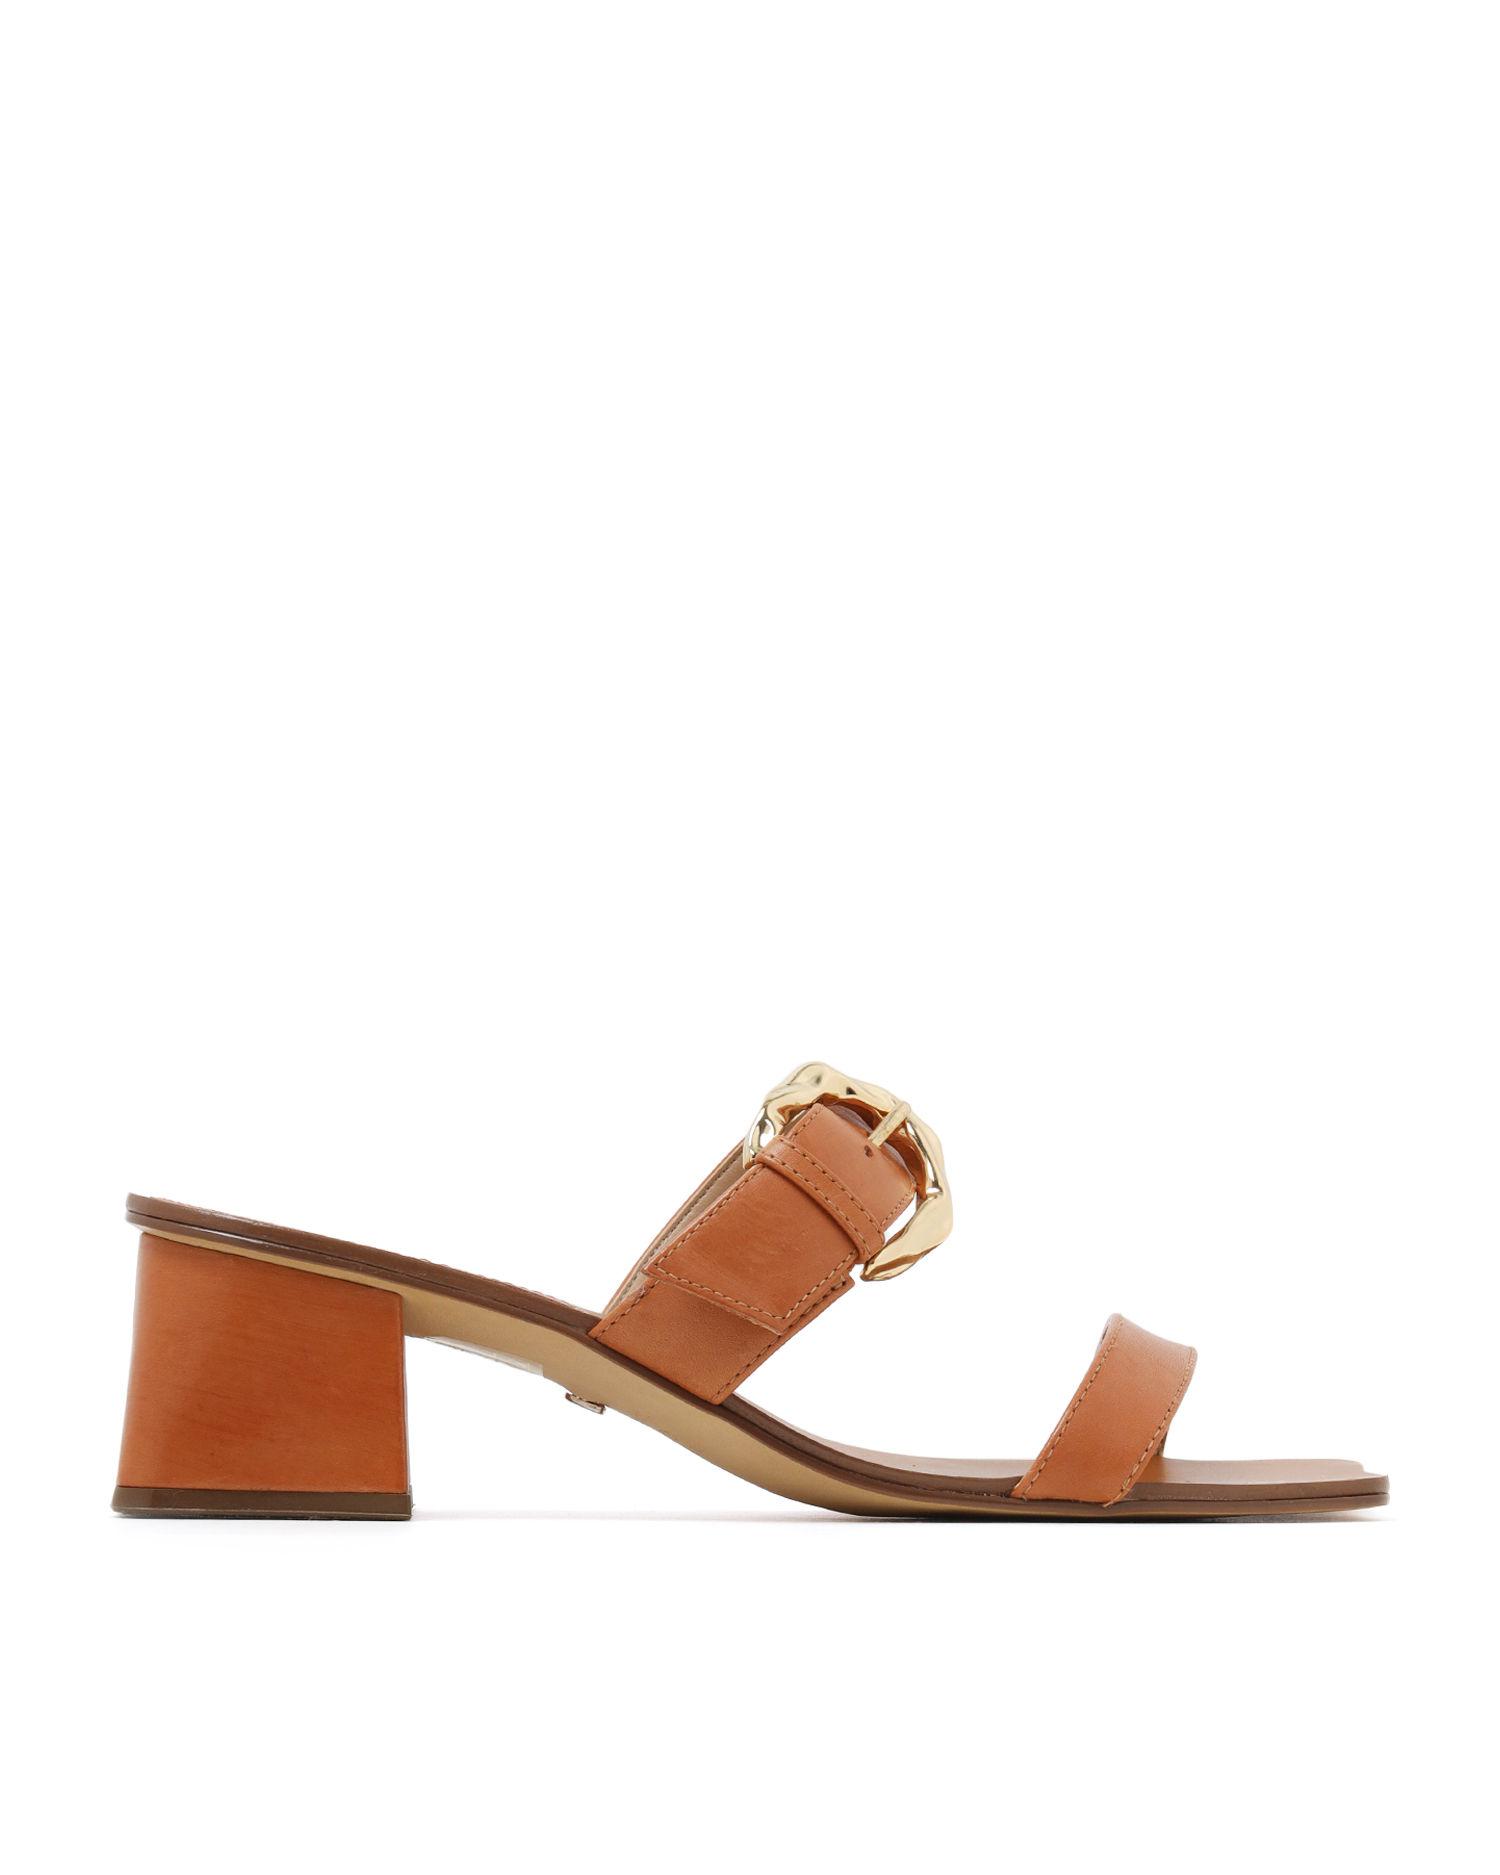 Belted sandals by AREZZO